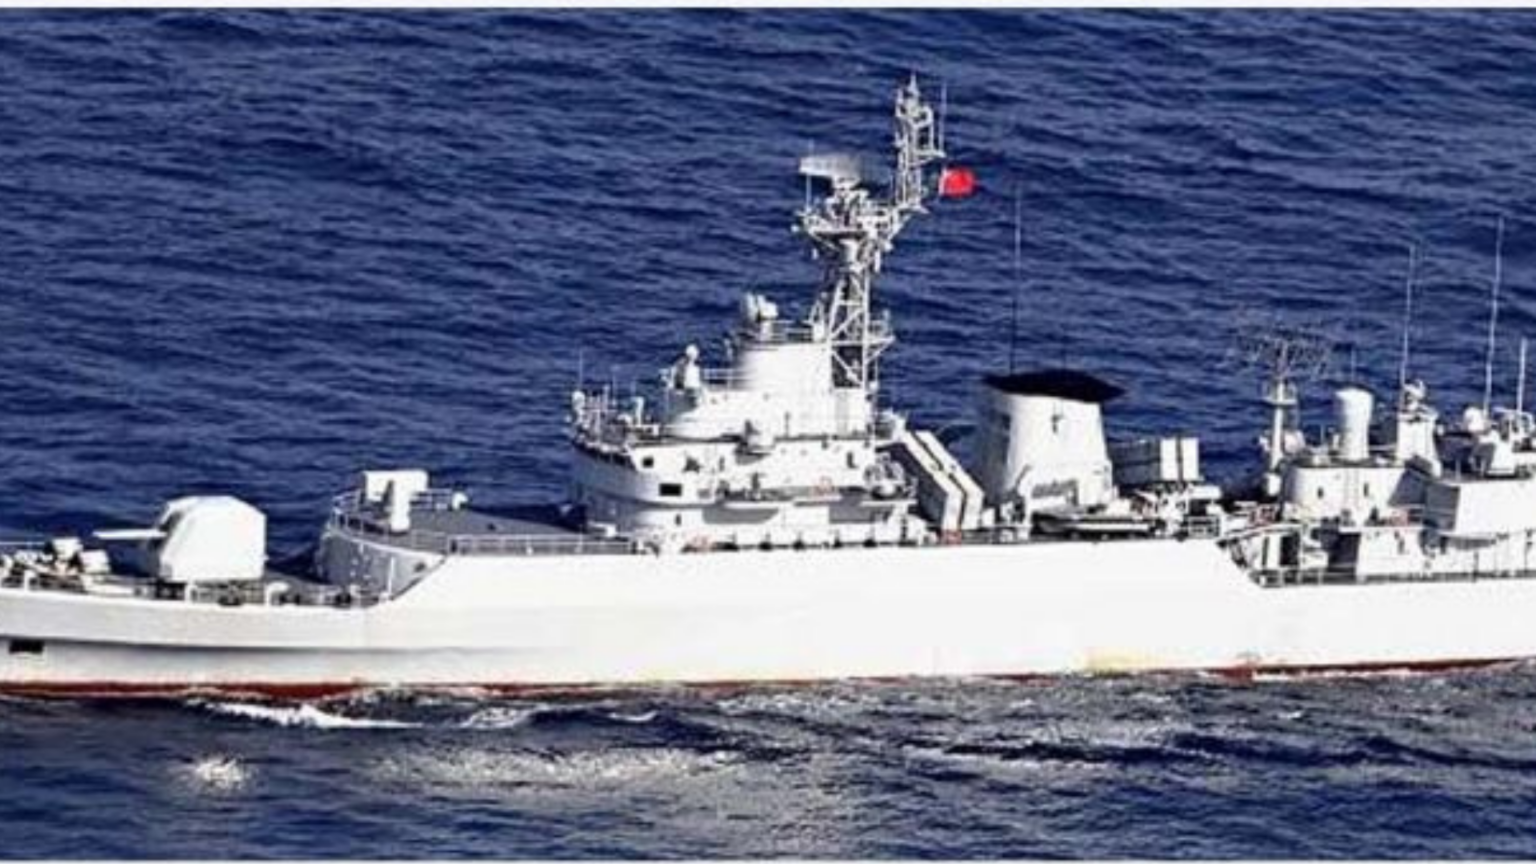 Russia's exploration of East China Sea put China in dilemma   - Asiana Times